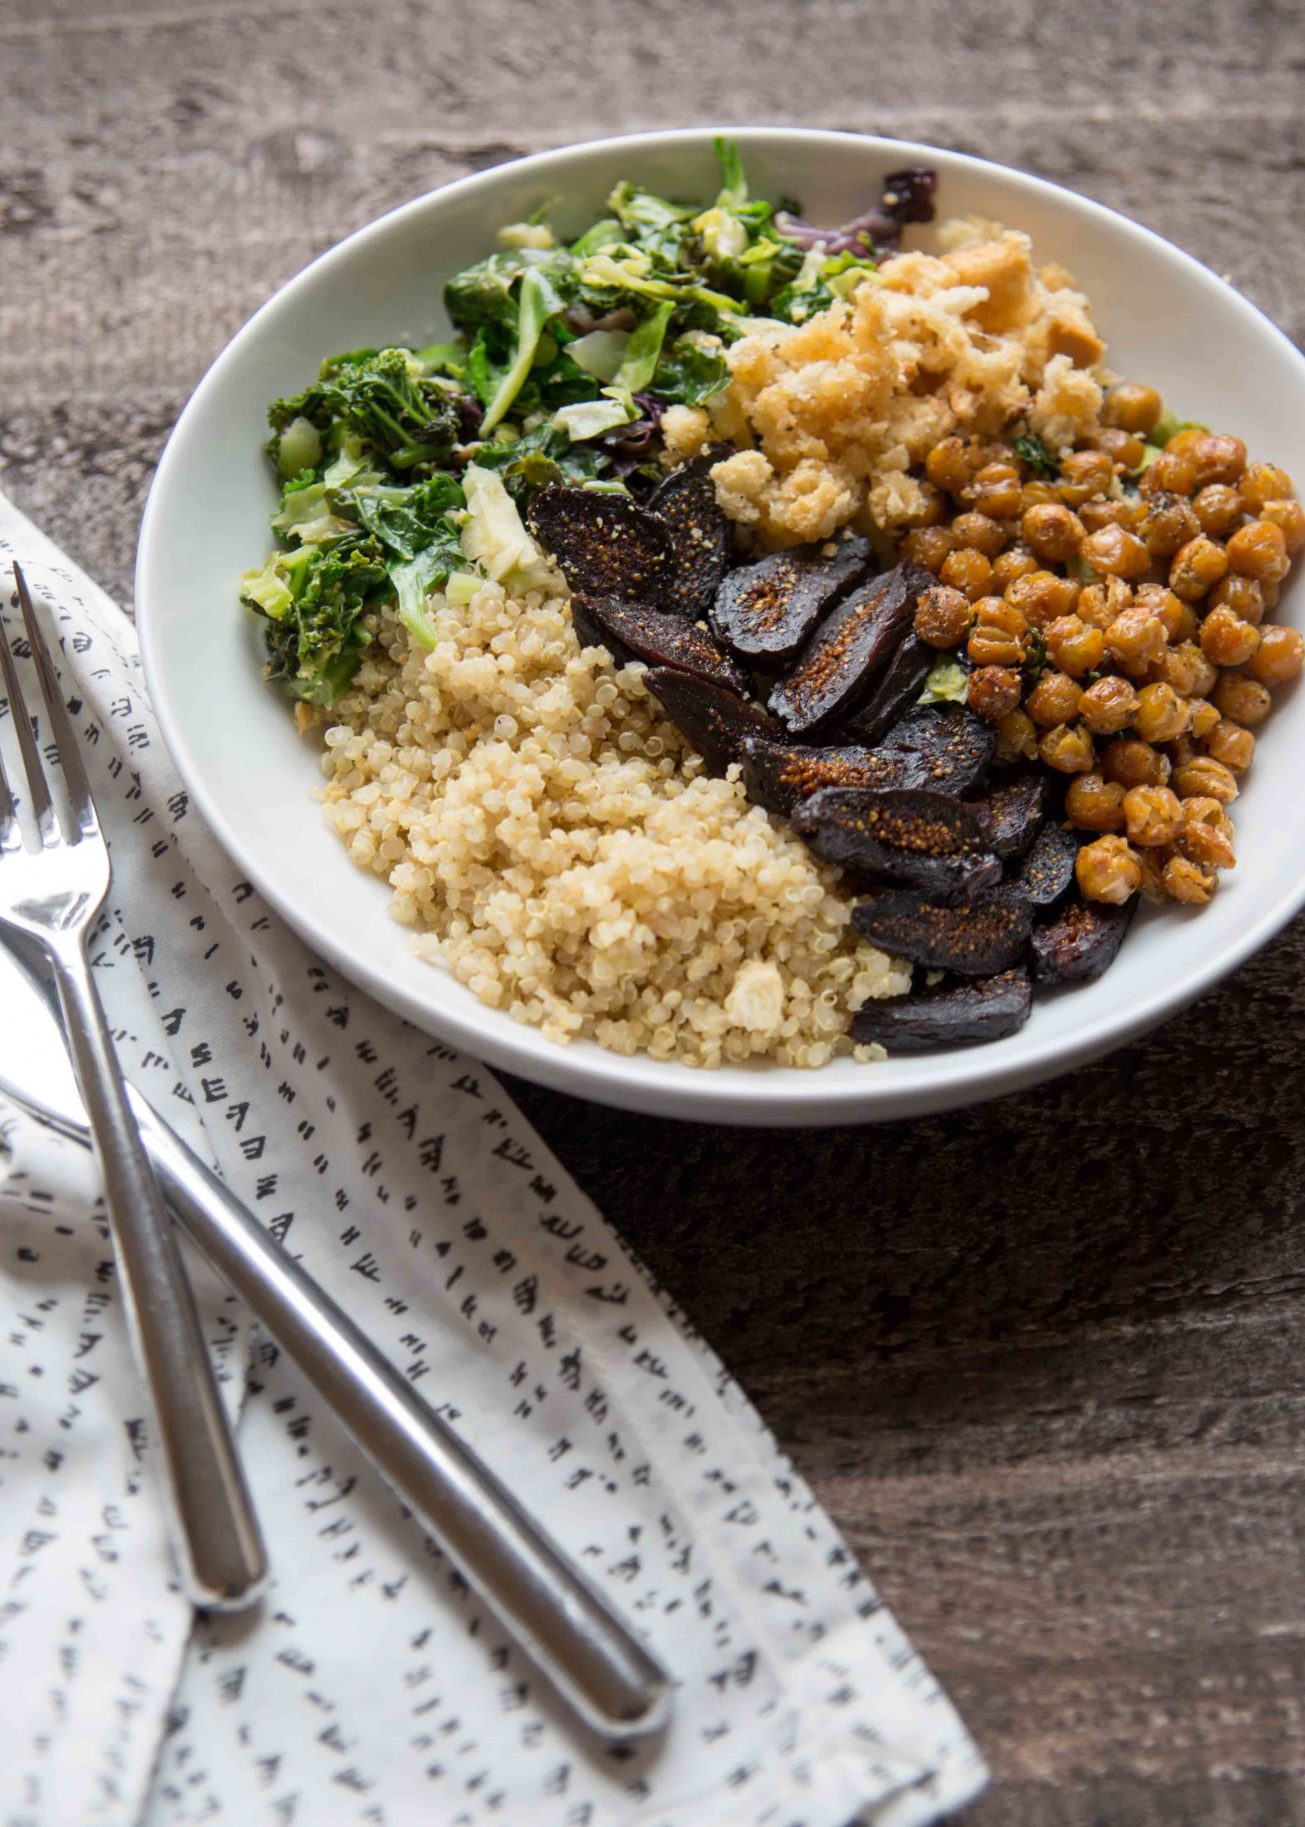 Easy meal alert! Make a pot of quinoa to meal prep for the week ahead. As you consider quinoa bowl ideas, reach for an Asiago Kale Salad Kit and our dried figs.